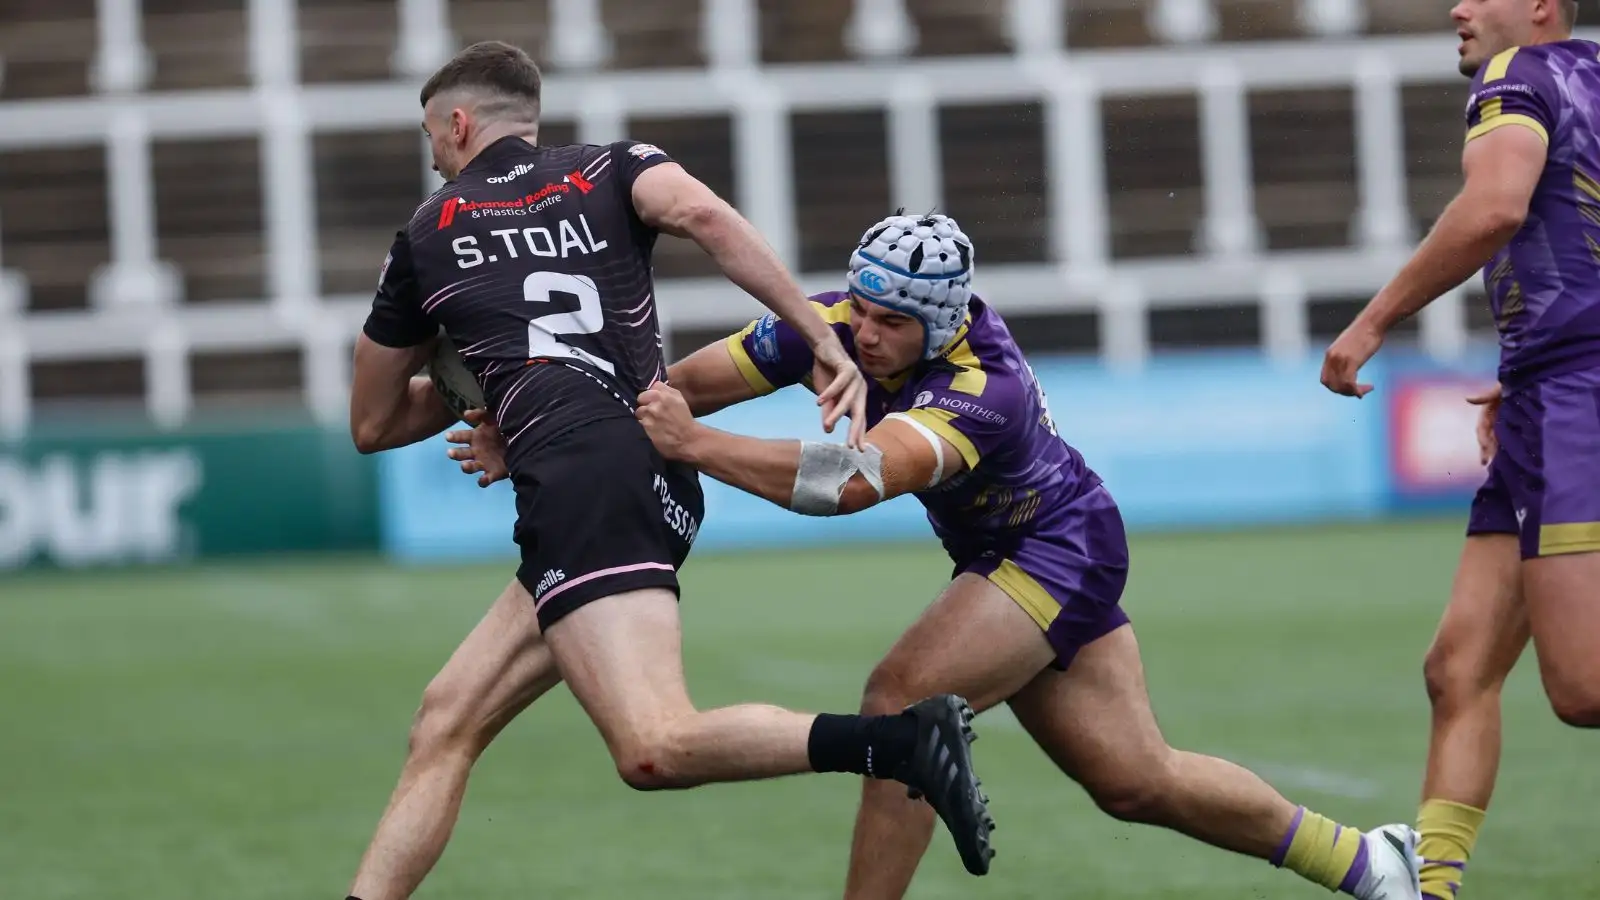 Hunslet youngster handed Toulouse Olympique trial as starlet goes in search of securing ‘dream’ full-time contract